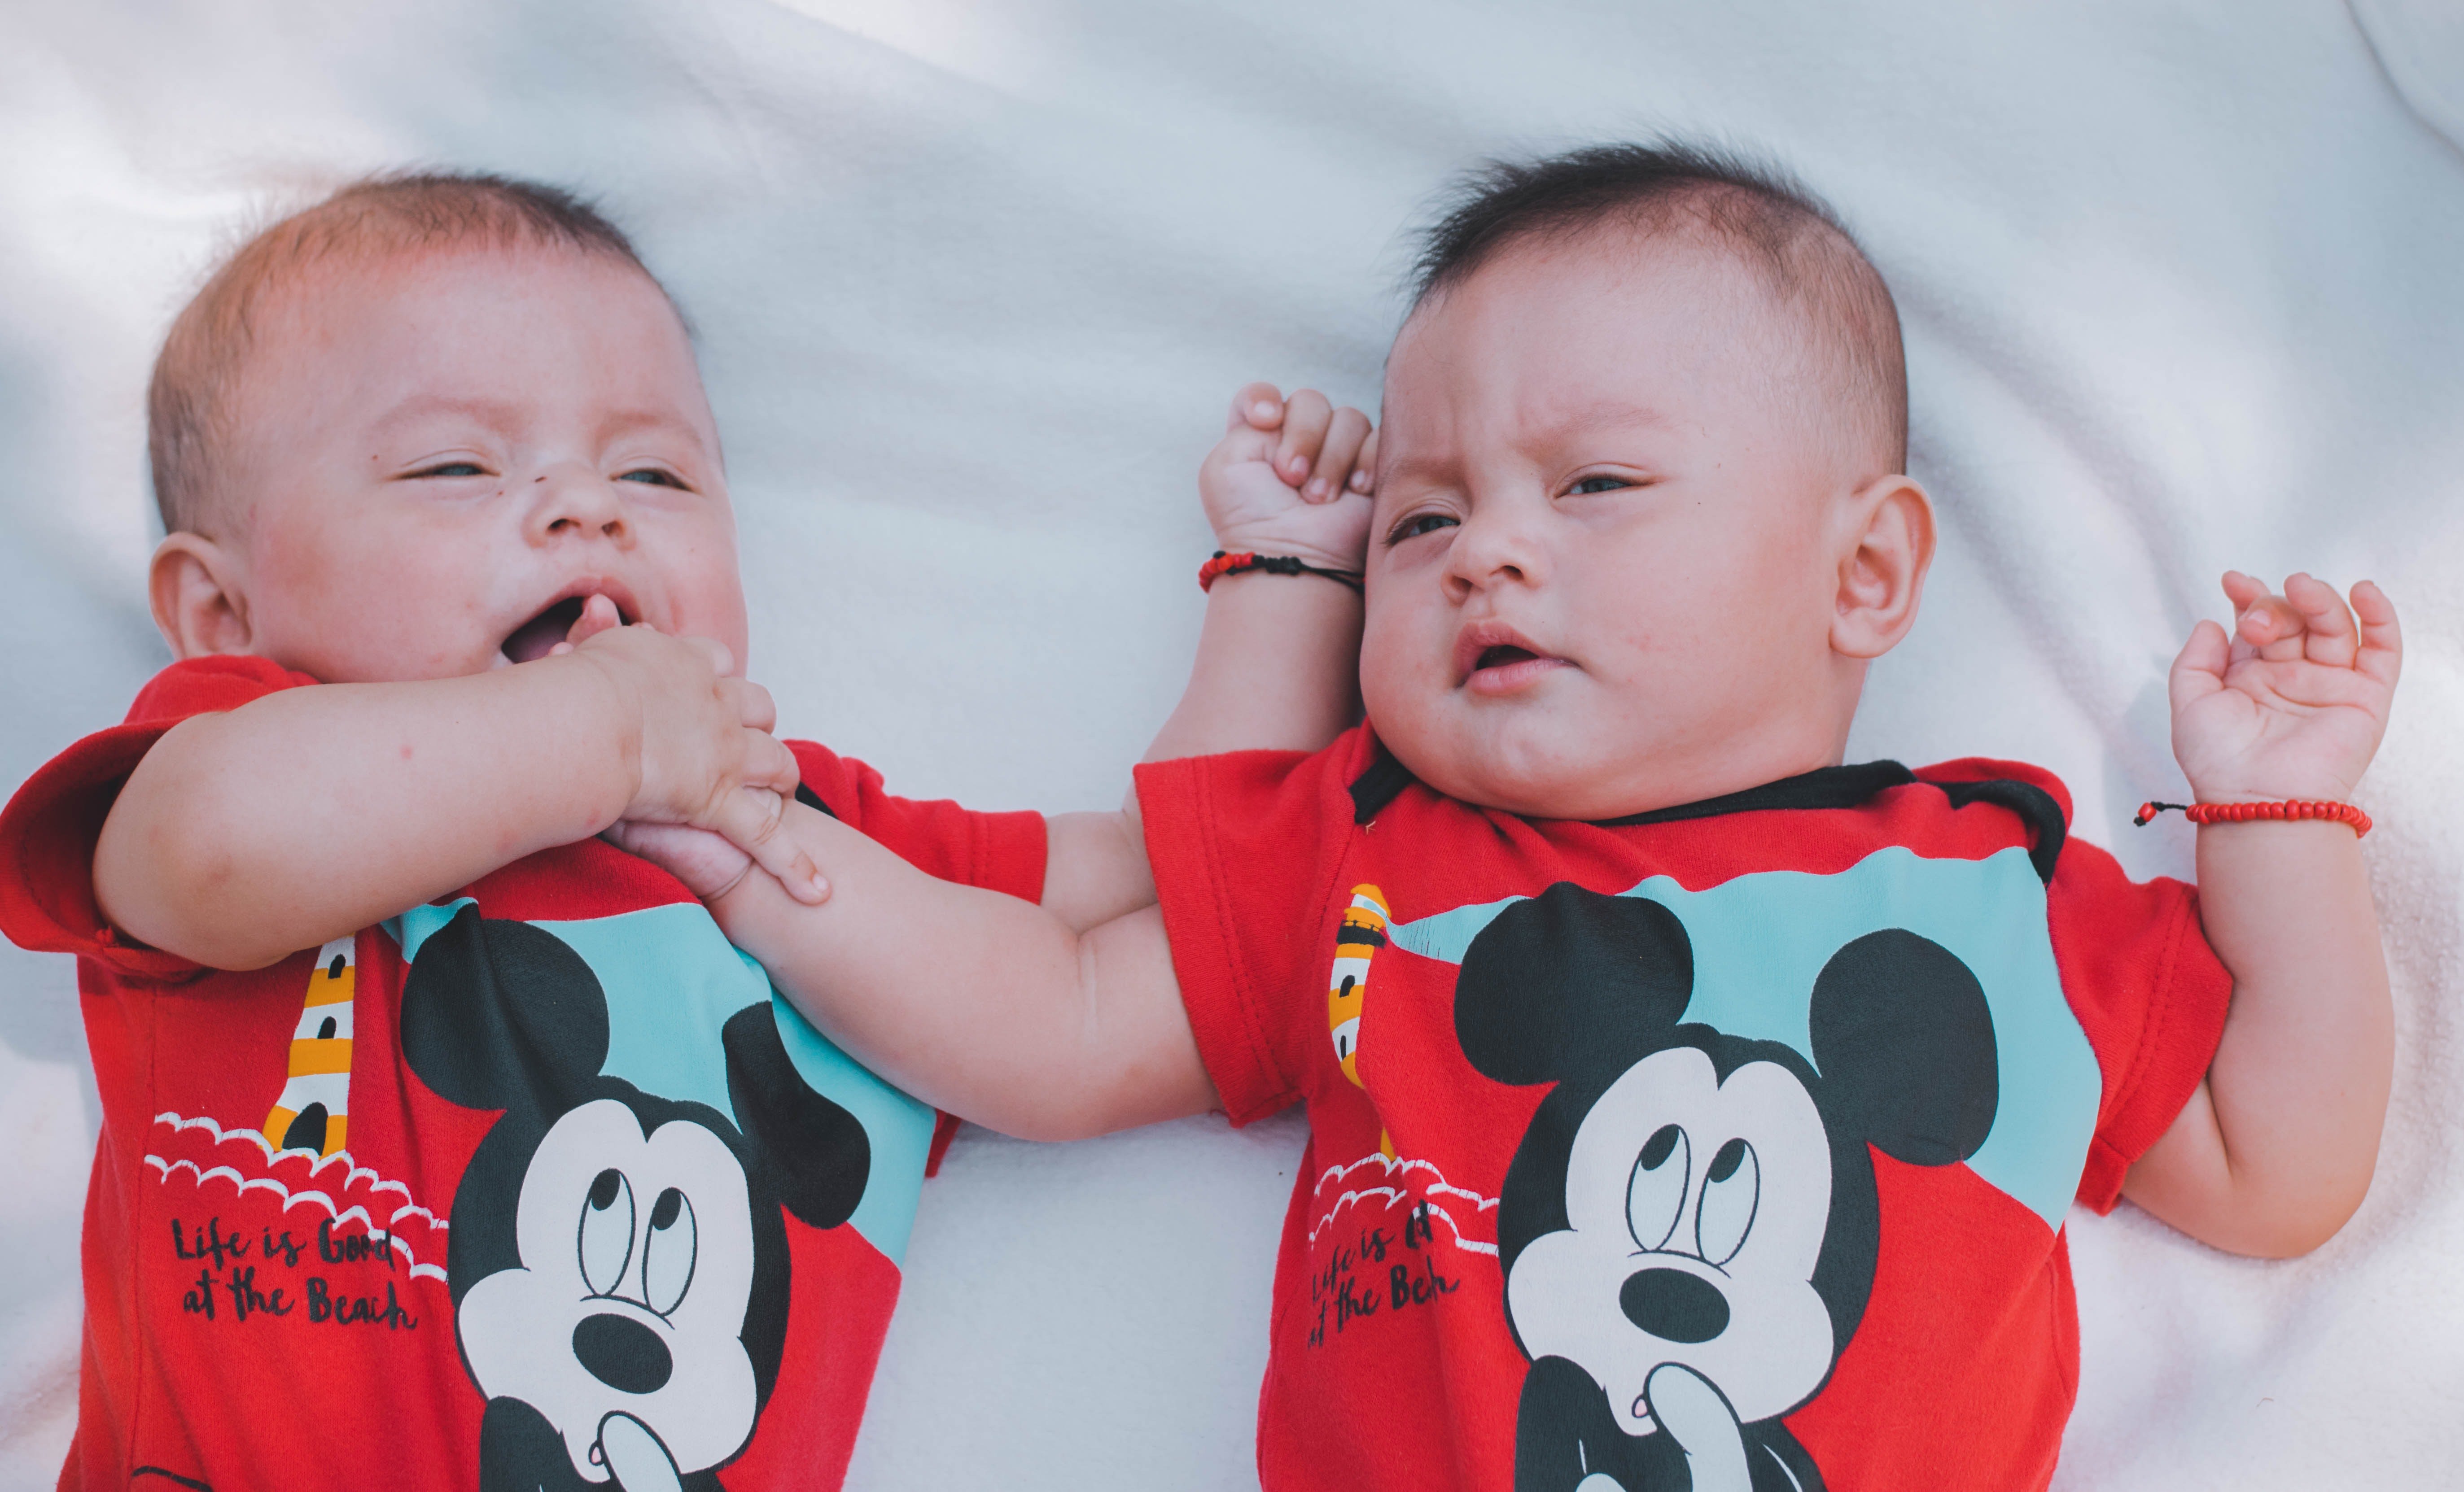 Sean and his colleagues were surprised to find out that Gabriel had twin daughters. | Source: Pexels